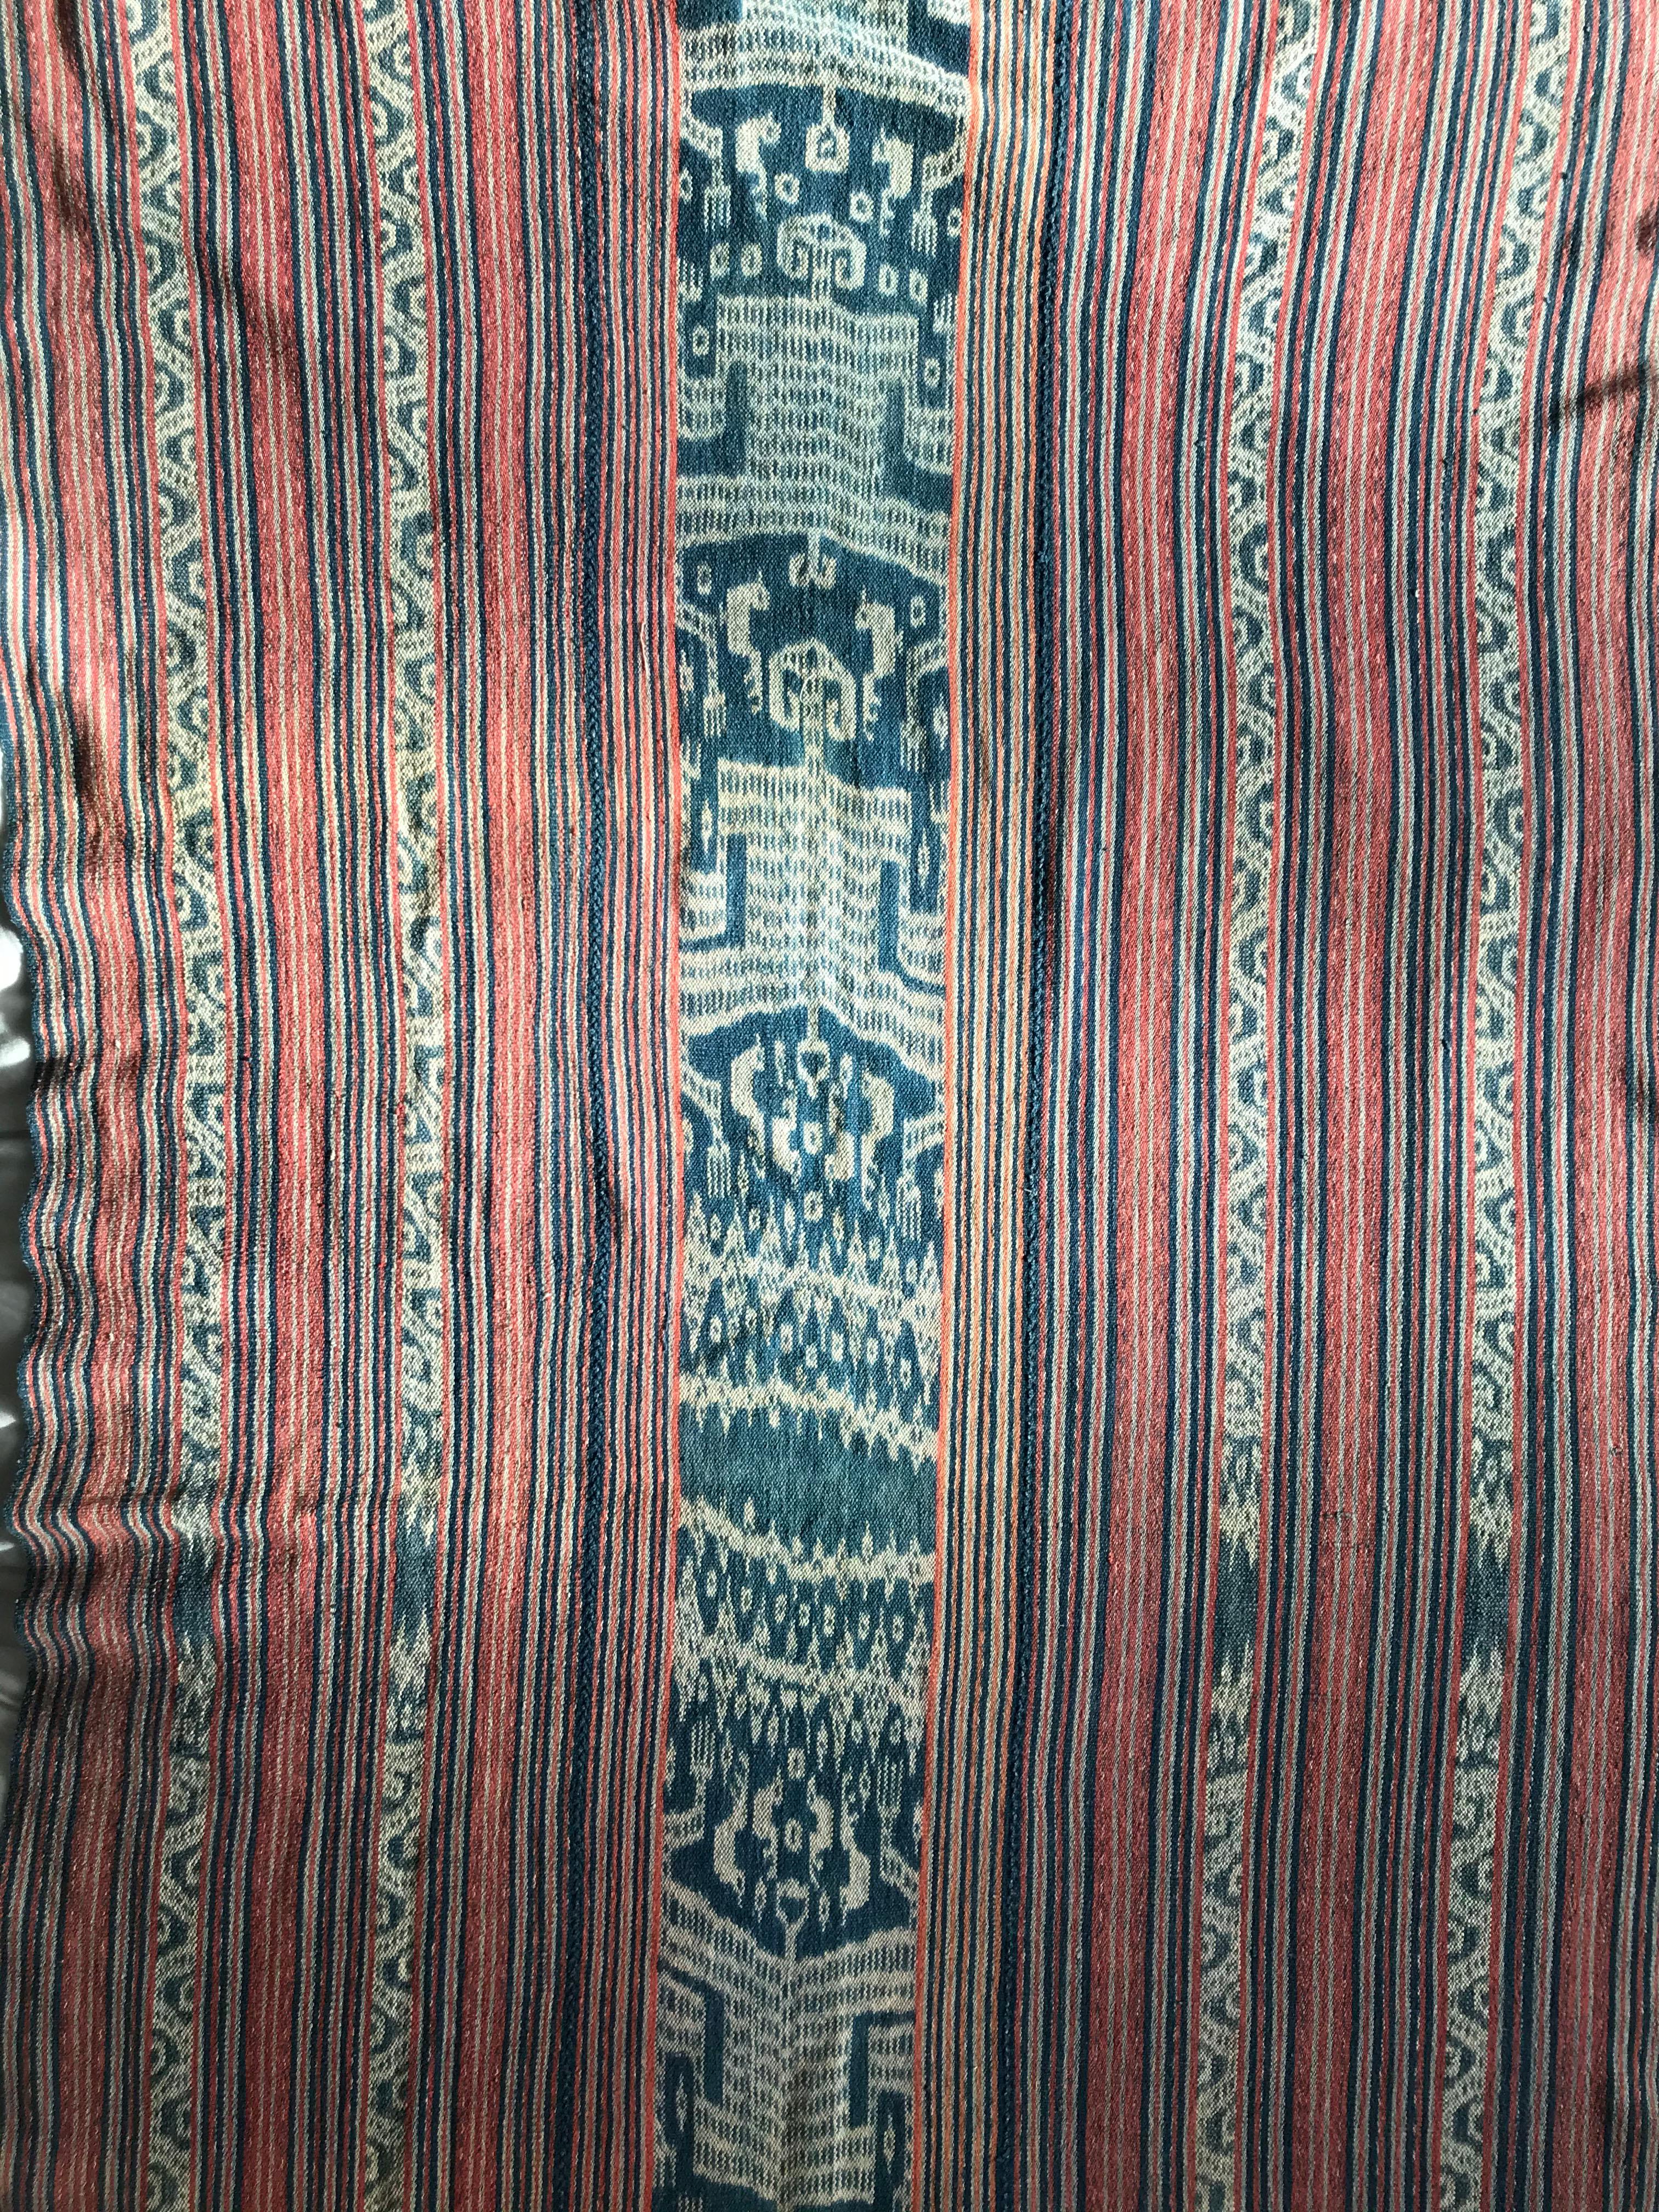 Indonesian Vintage Ikat Cloth Timor Indonesia Asian Textiles Home Decor